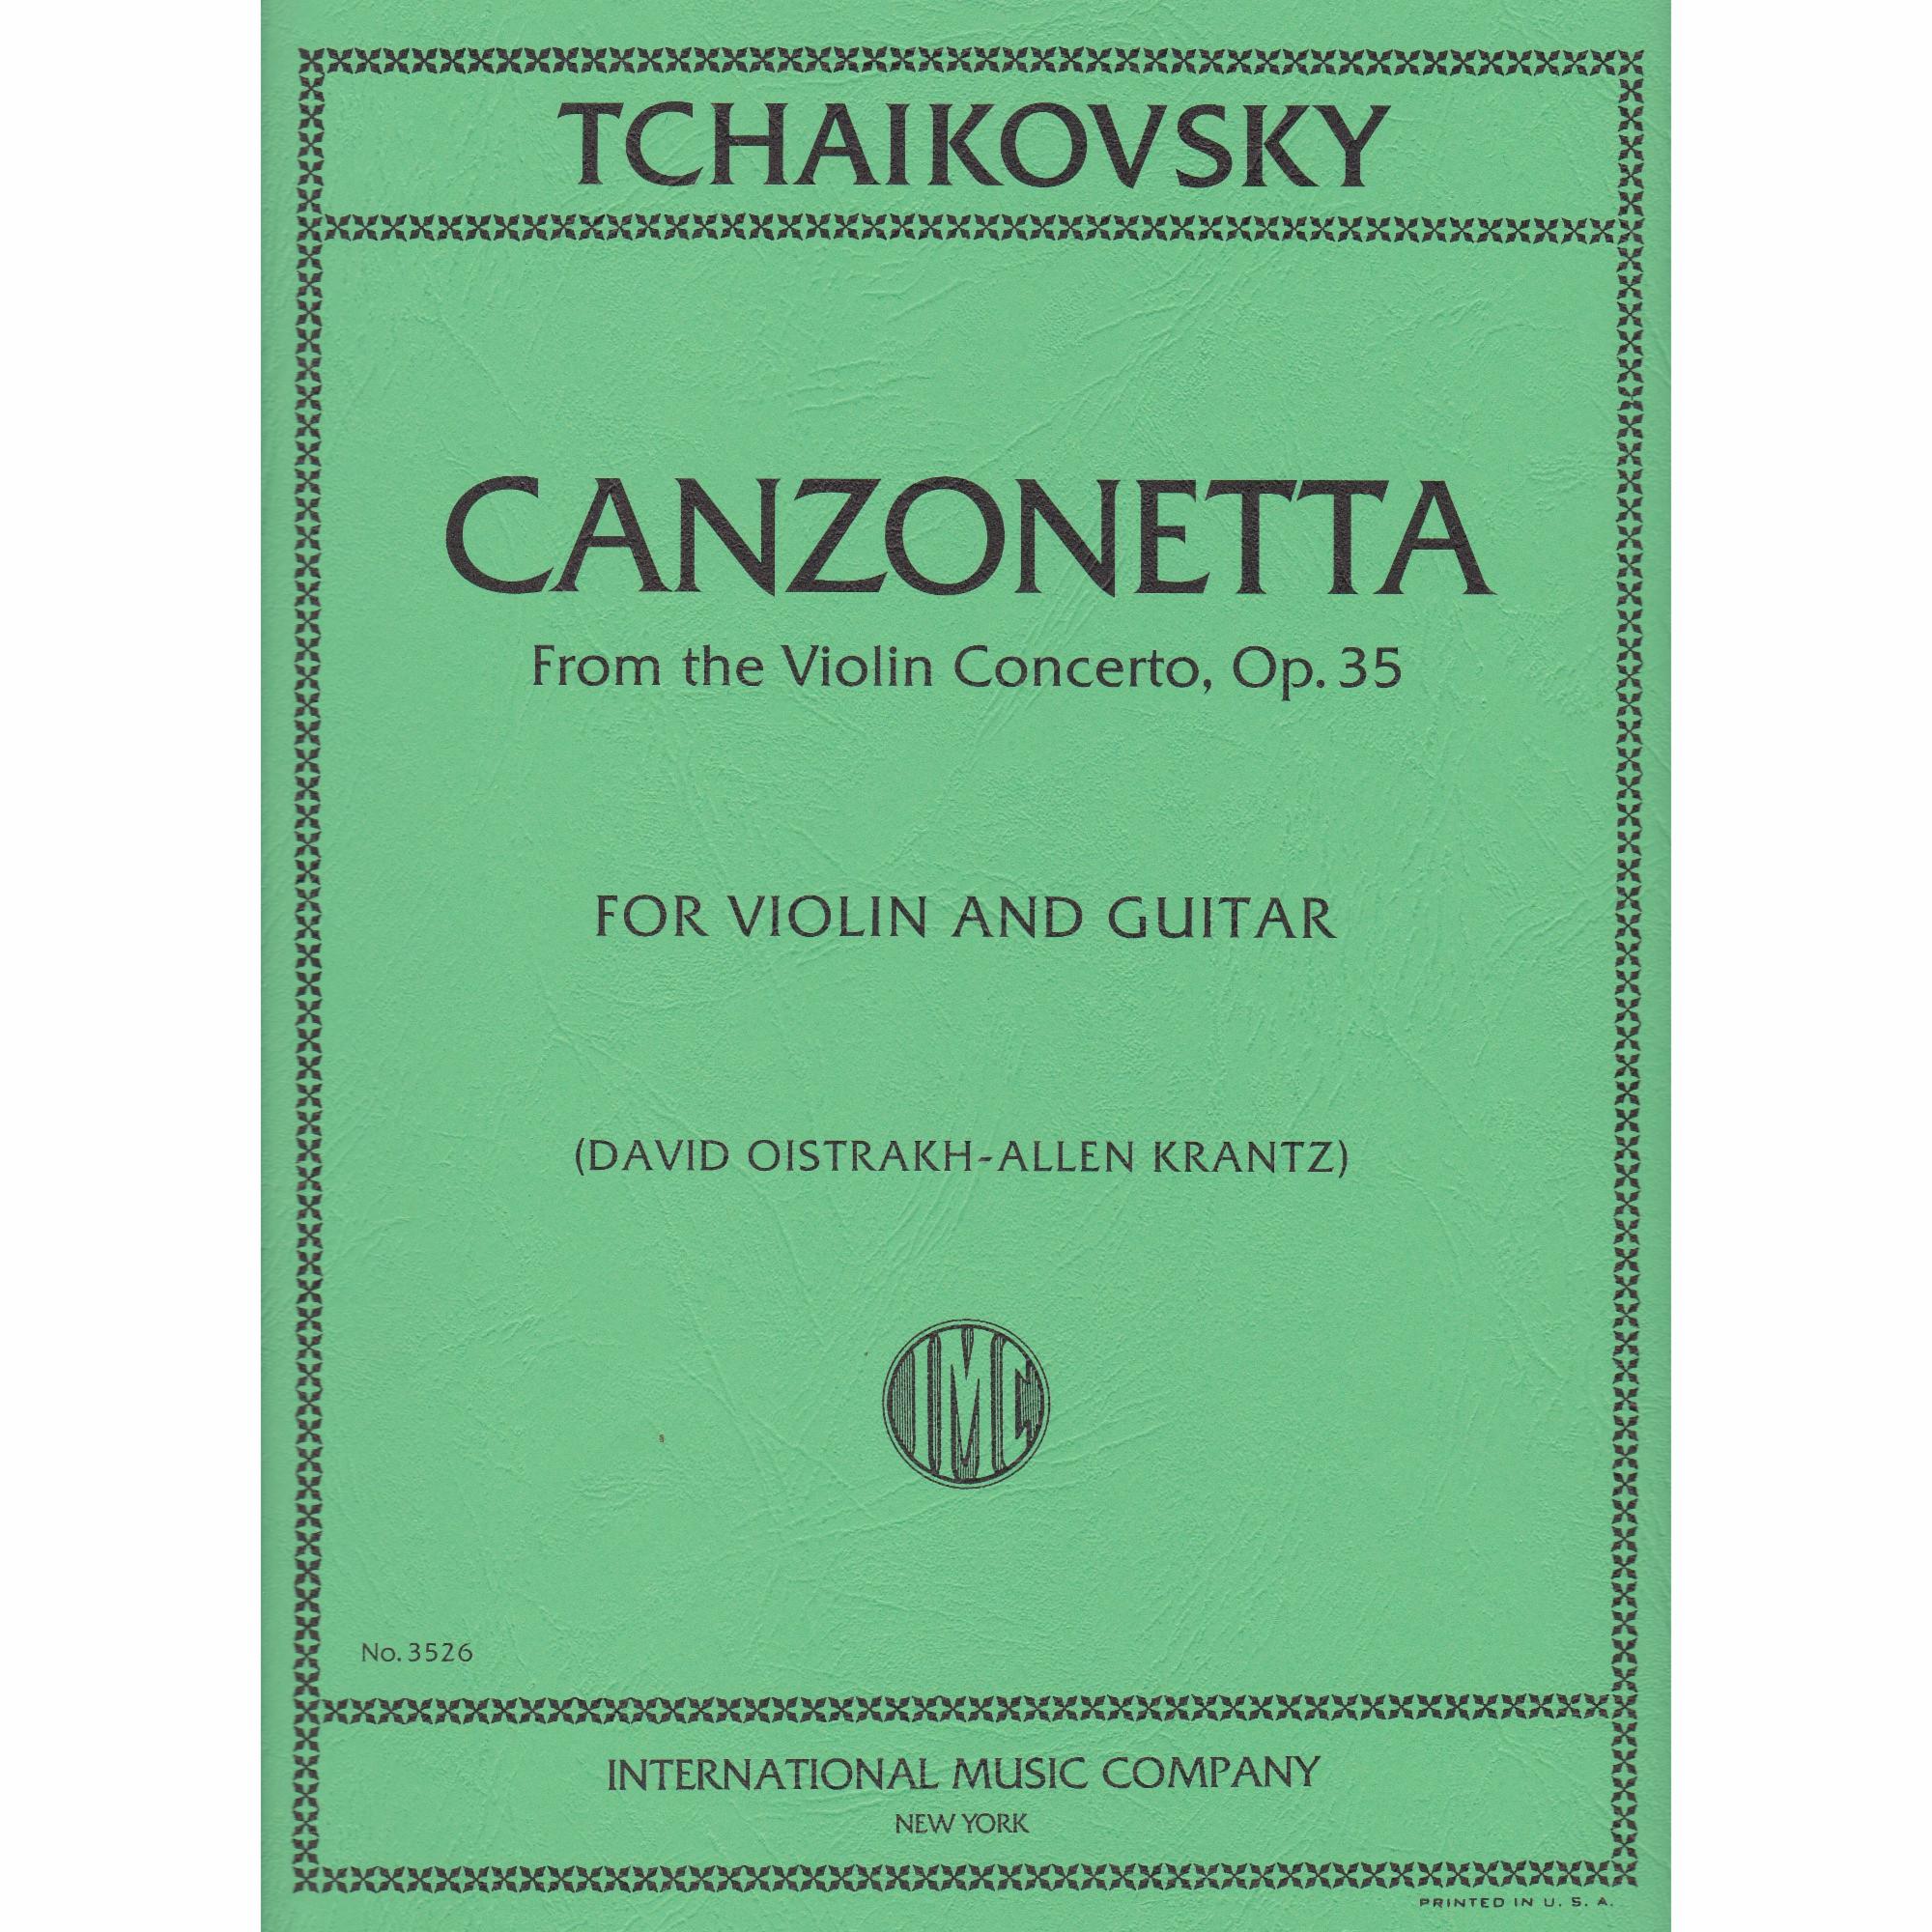 Canzonetta from the Violin Concerto for Violin and Guitar